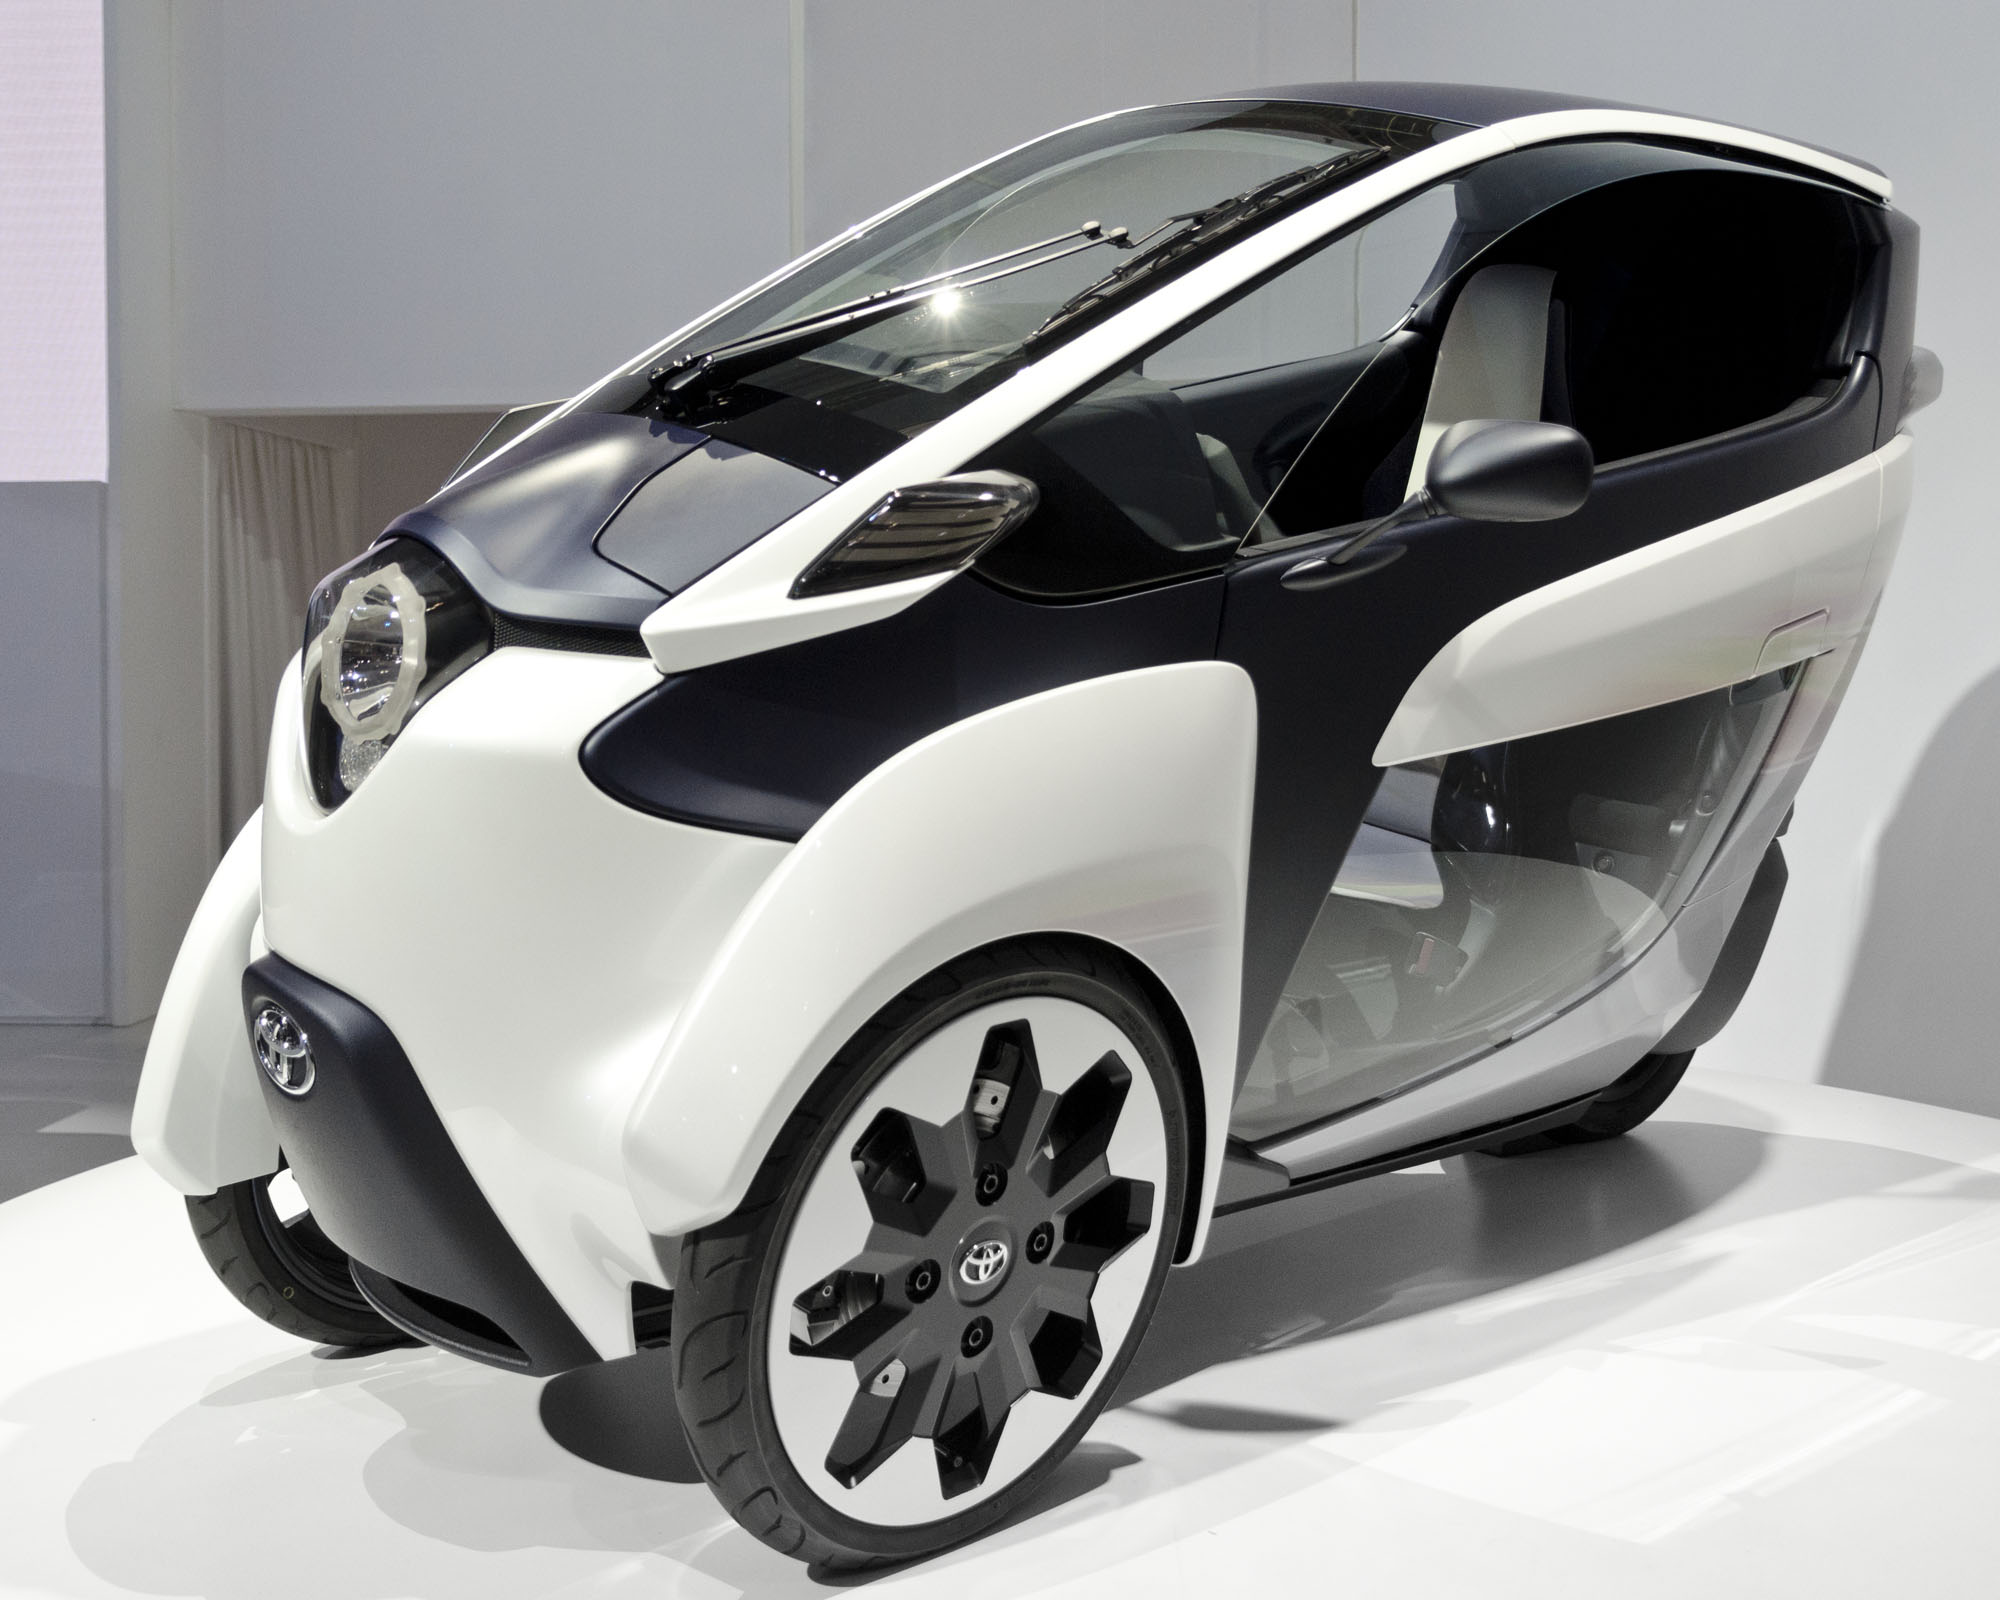 Electric Vehicle Market Rising Trends, Technology Research and Precise Outlook 2019 to 2026